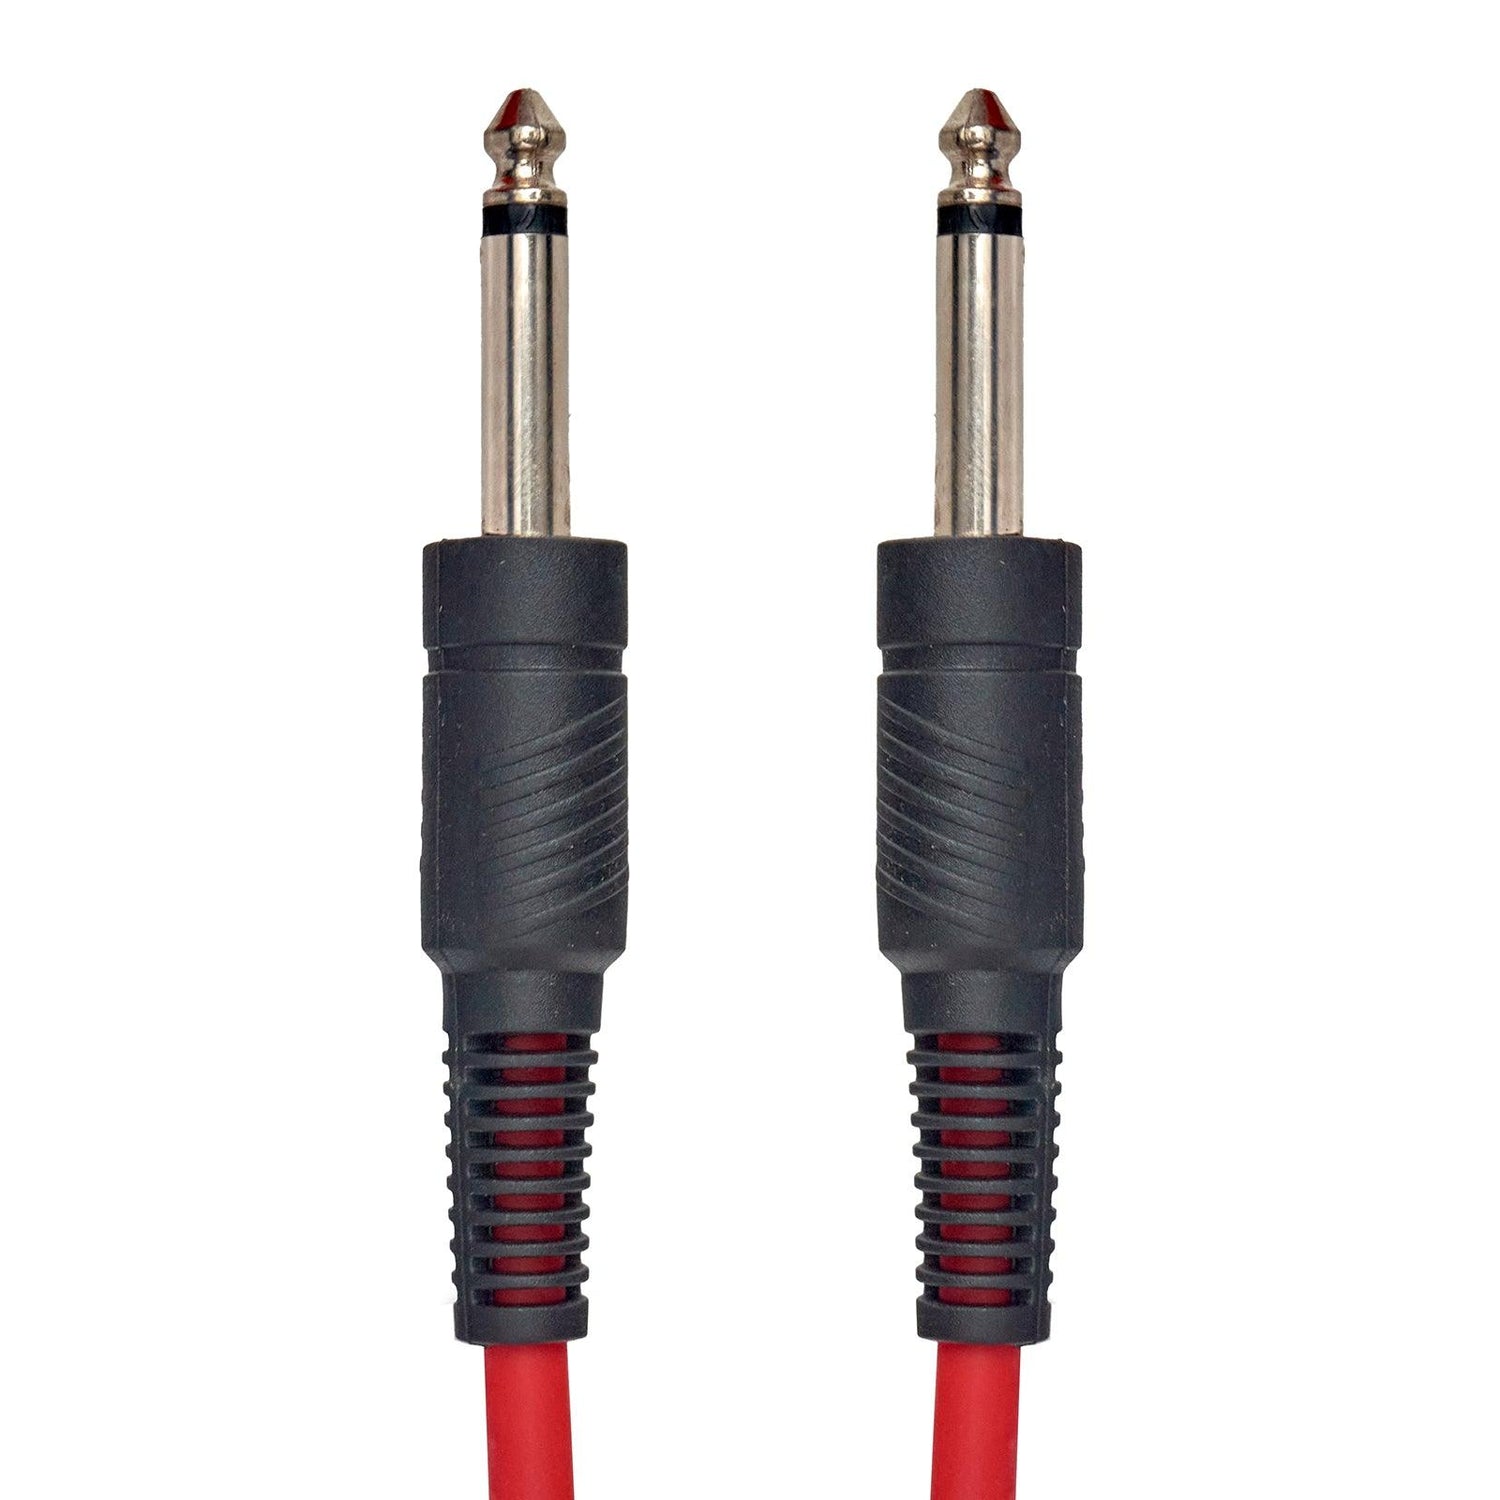 Phono Cables